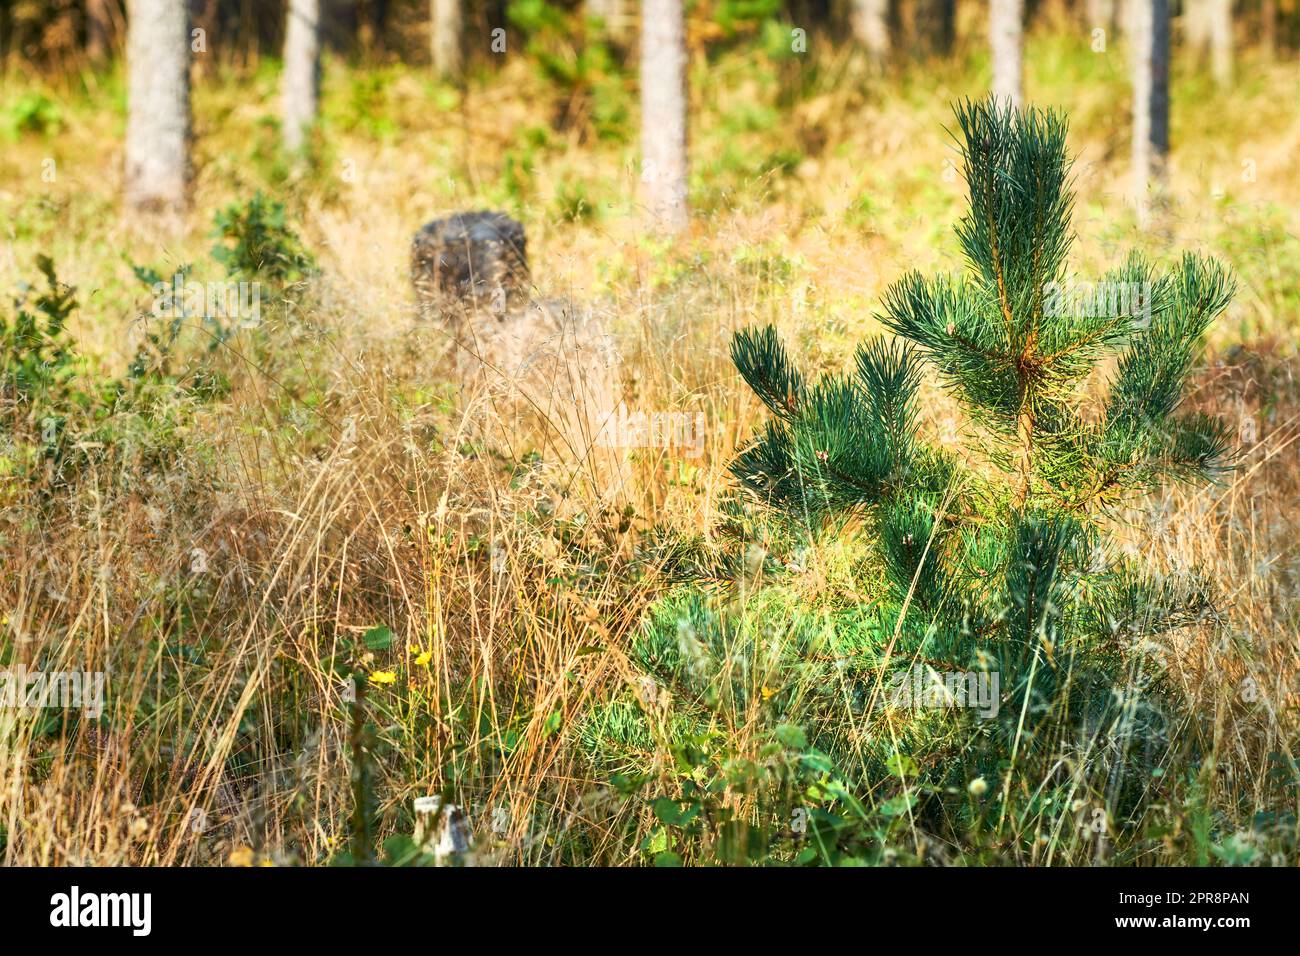 Closeup of small green pine tree growing in a fir and cedar forest with dry autumn grass in remote countryside woods. Environmental nature conservation and cultivation of coniferous trees for resin Stock Photo